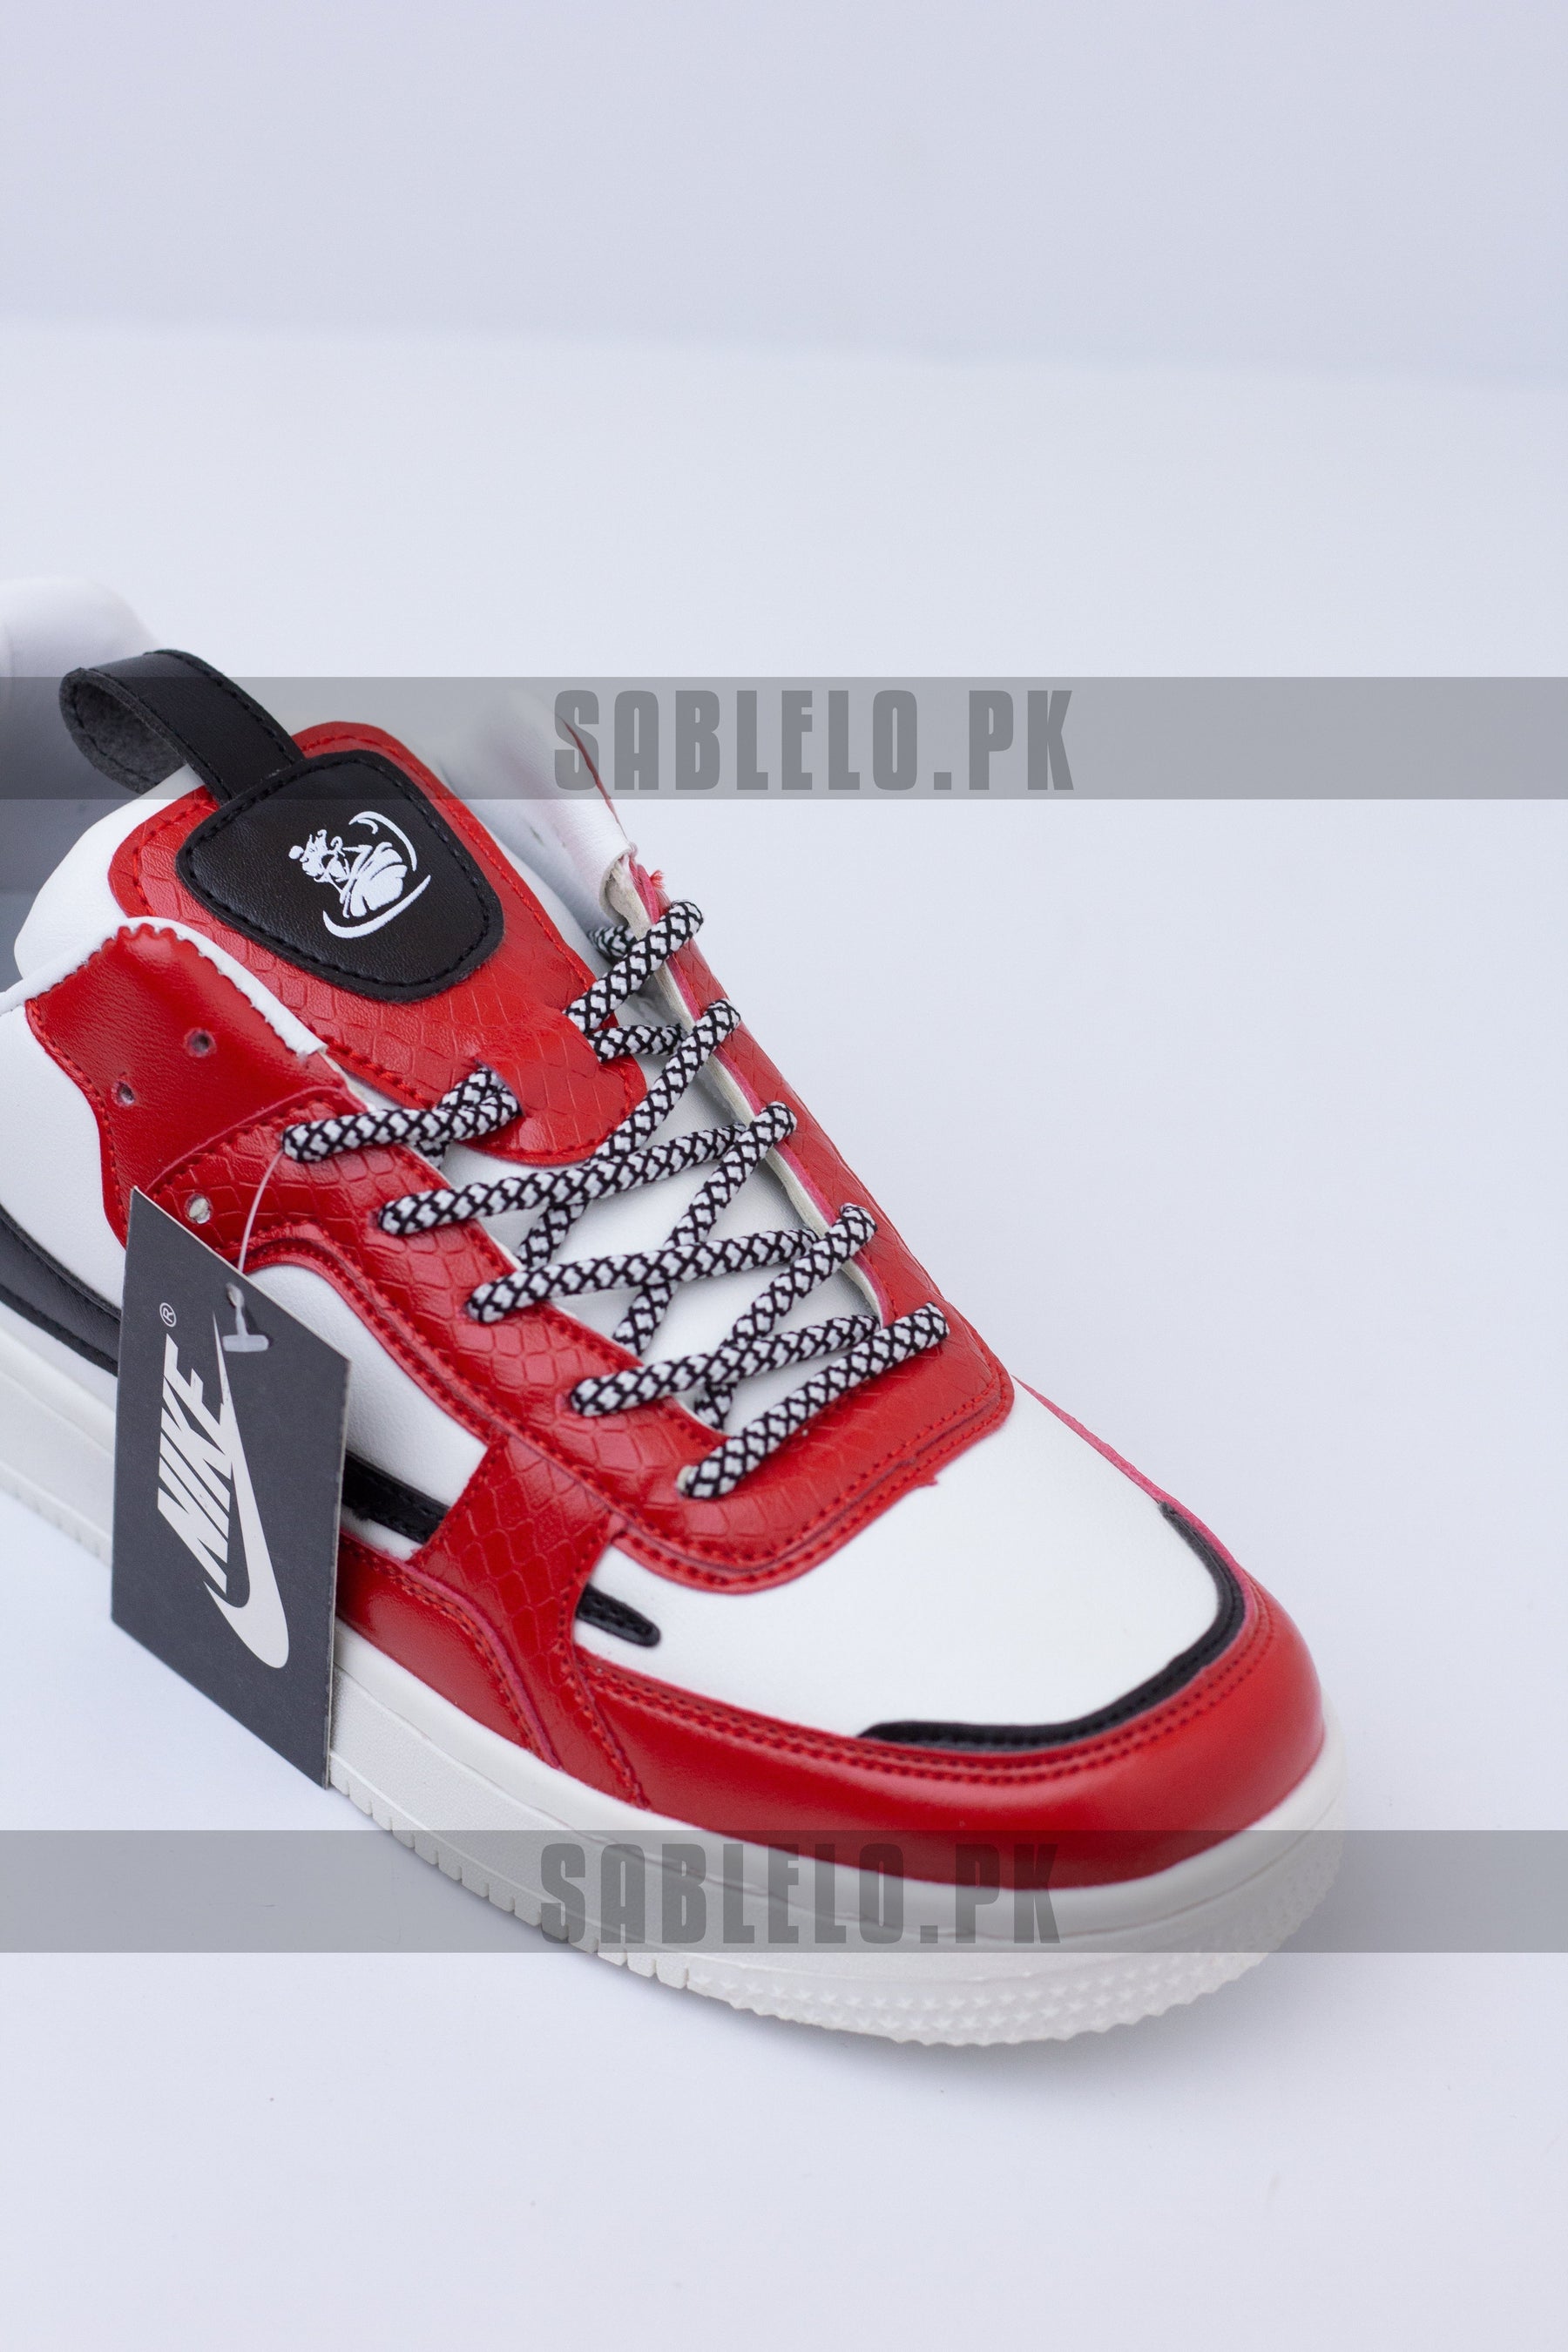 Airforce Bekhook Red White Black - Premium Shoes from Sablelo.pk - Just Rs.2999! Shop now at Sablelo.pk